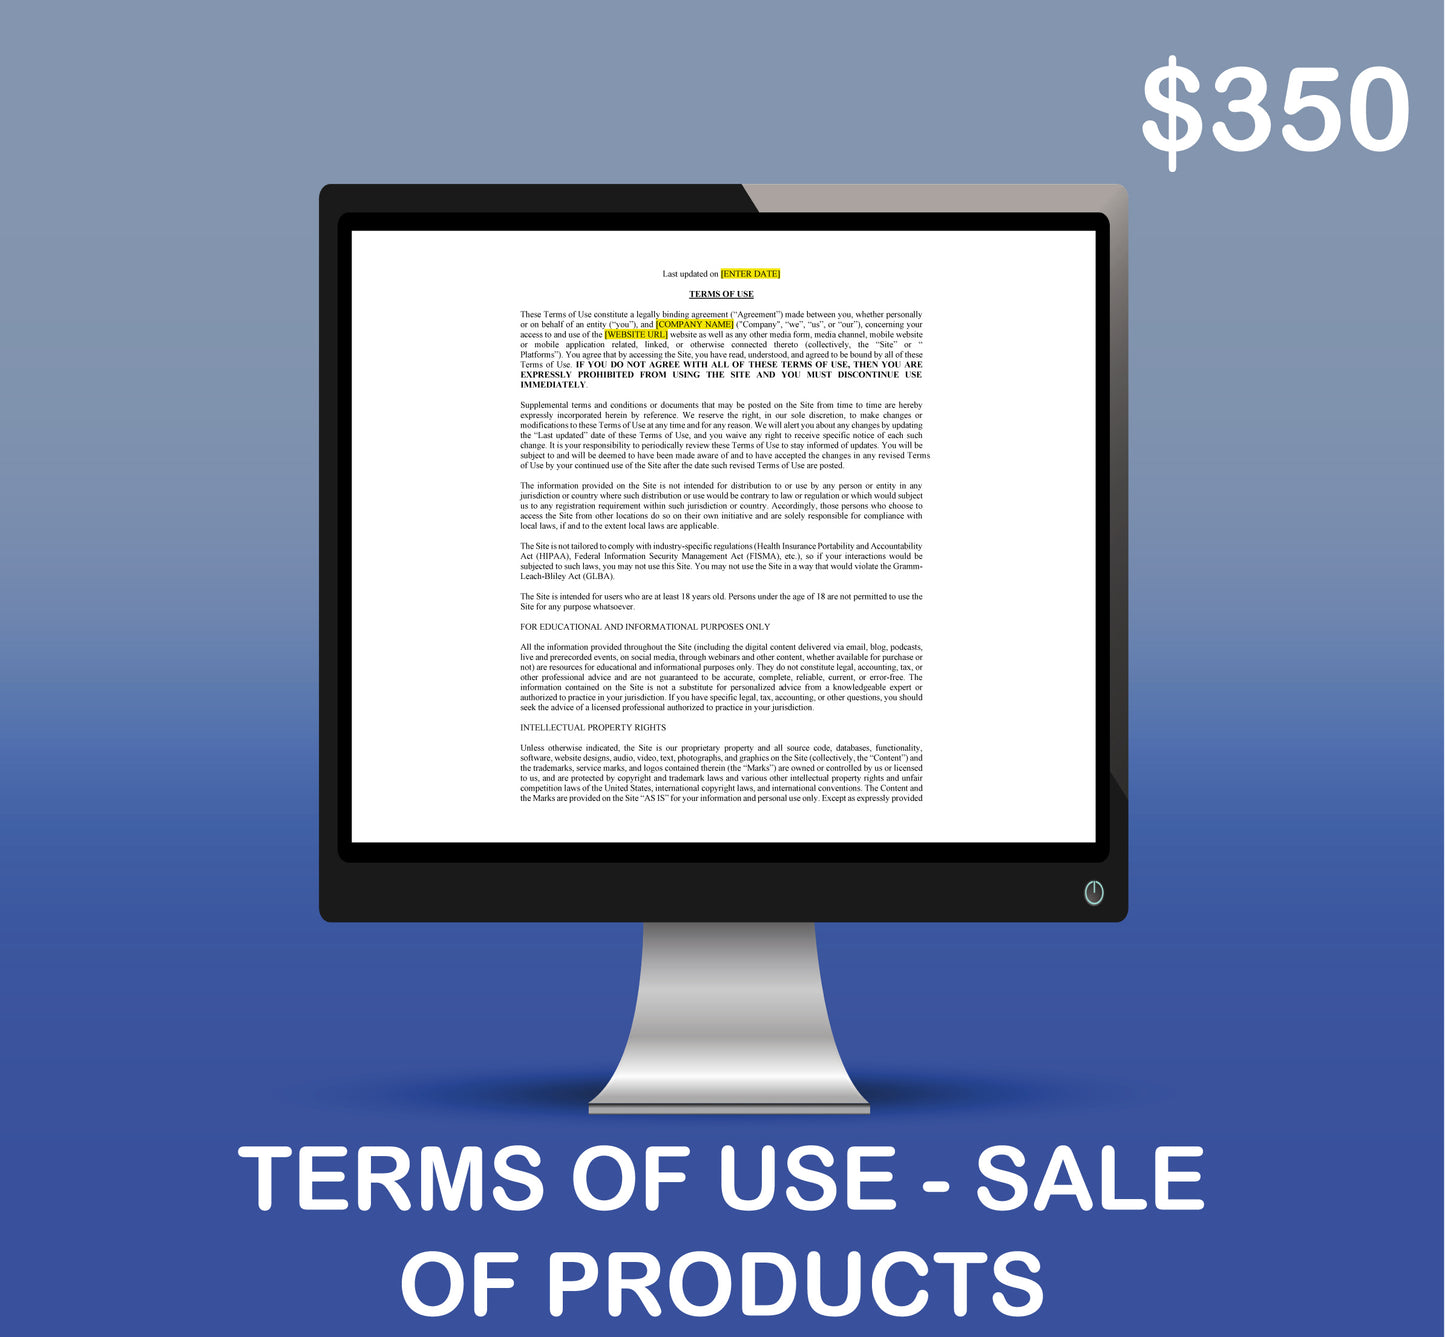 Terms of Use - Sale of Products